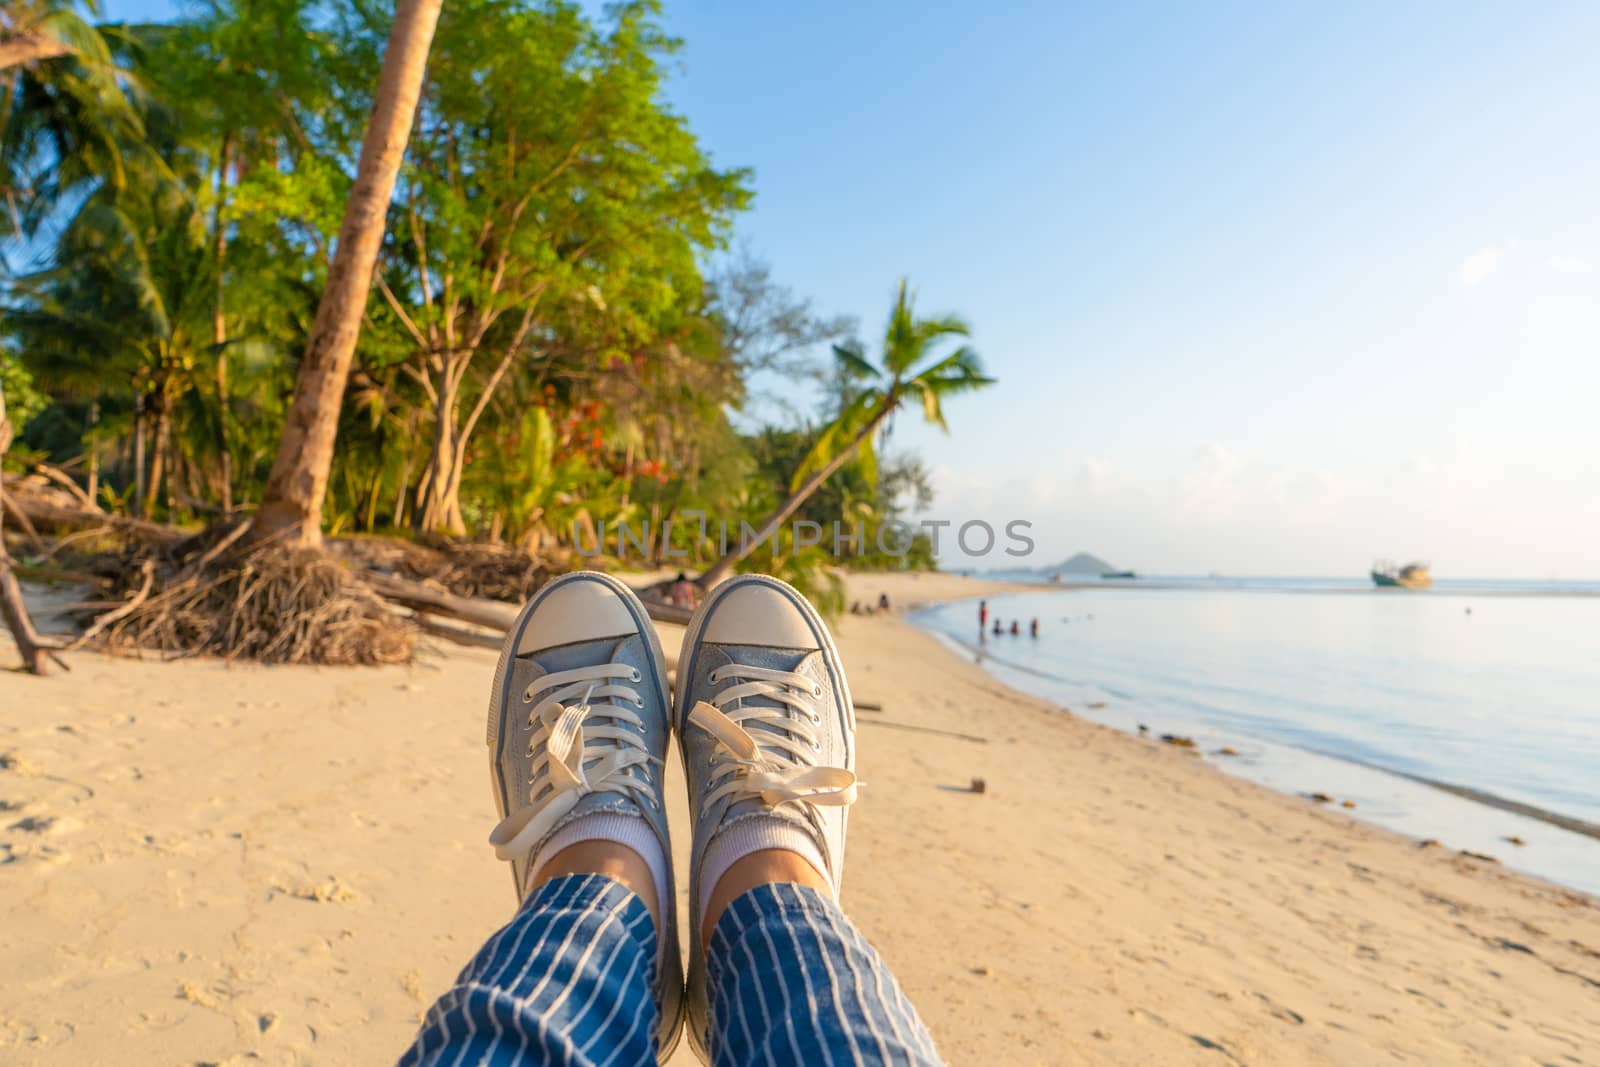 First-person view, a girl swinging on a swing on a sandy beach of a tropical island at sunset. Enjoys the vacation